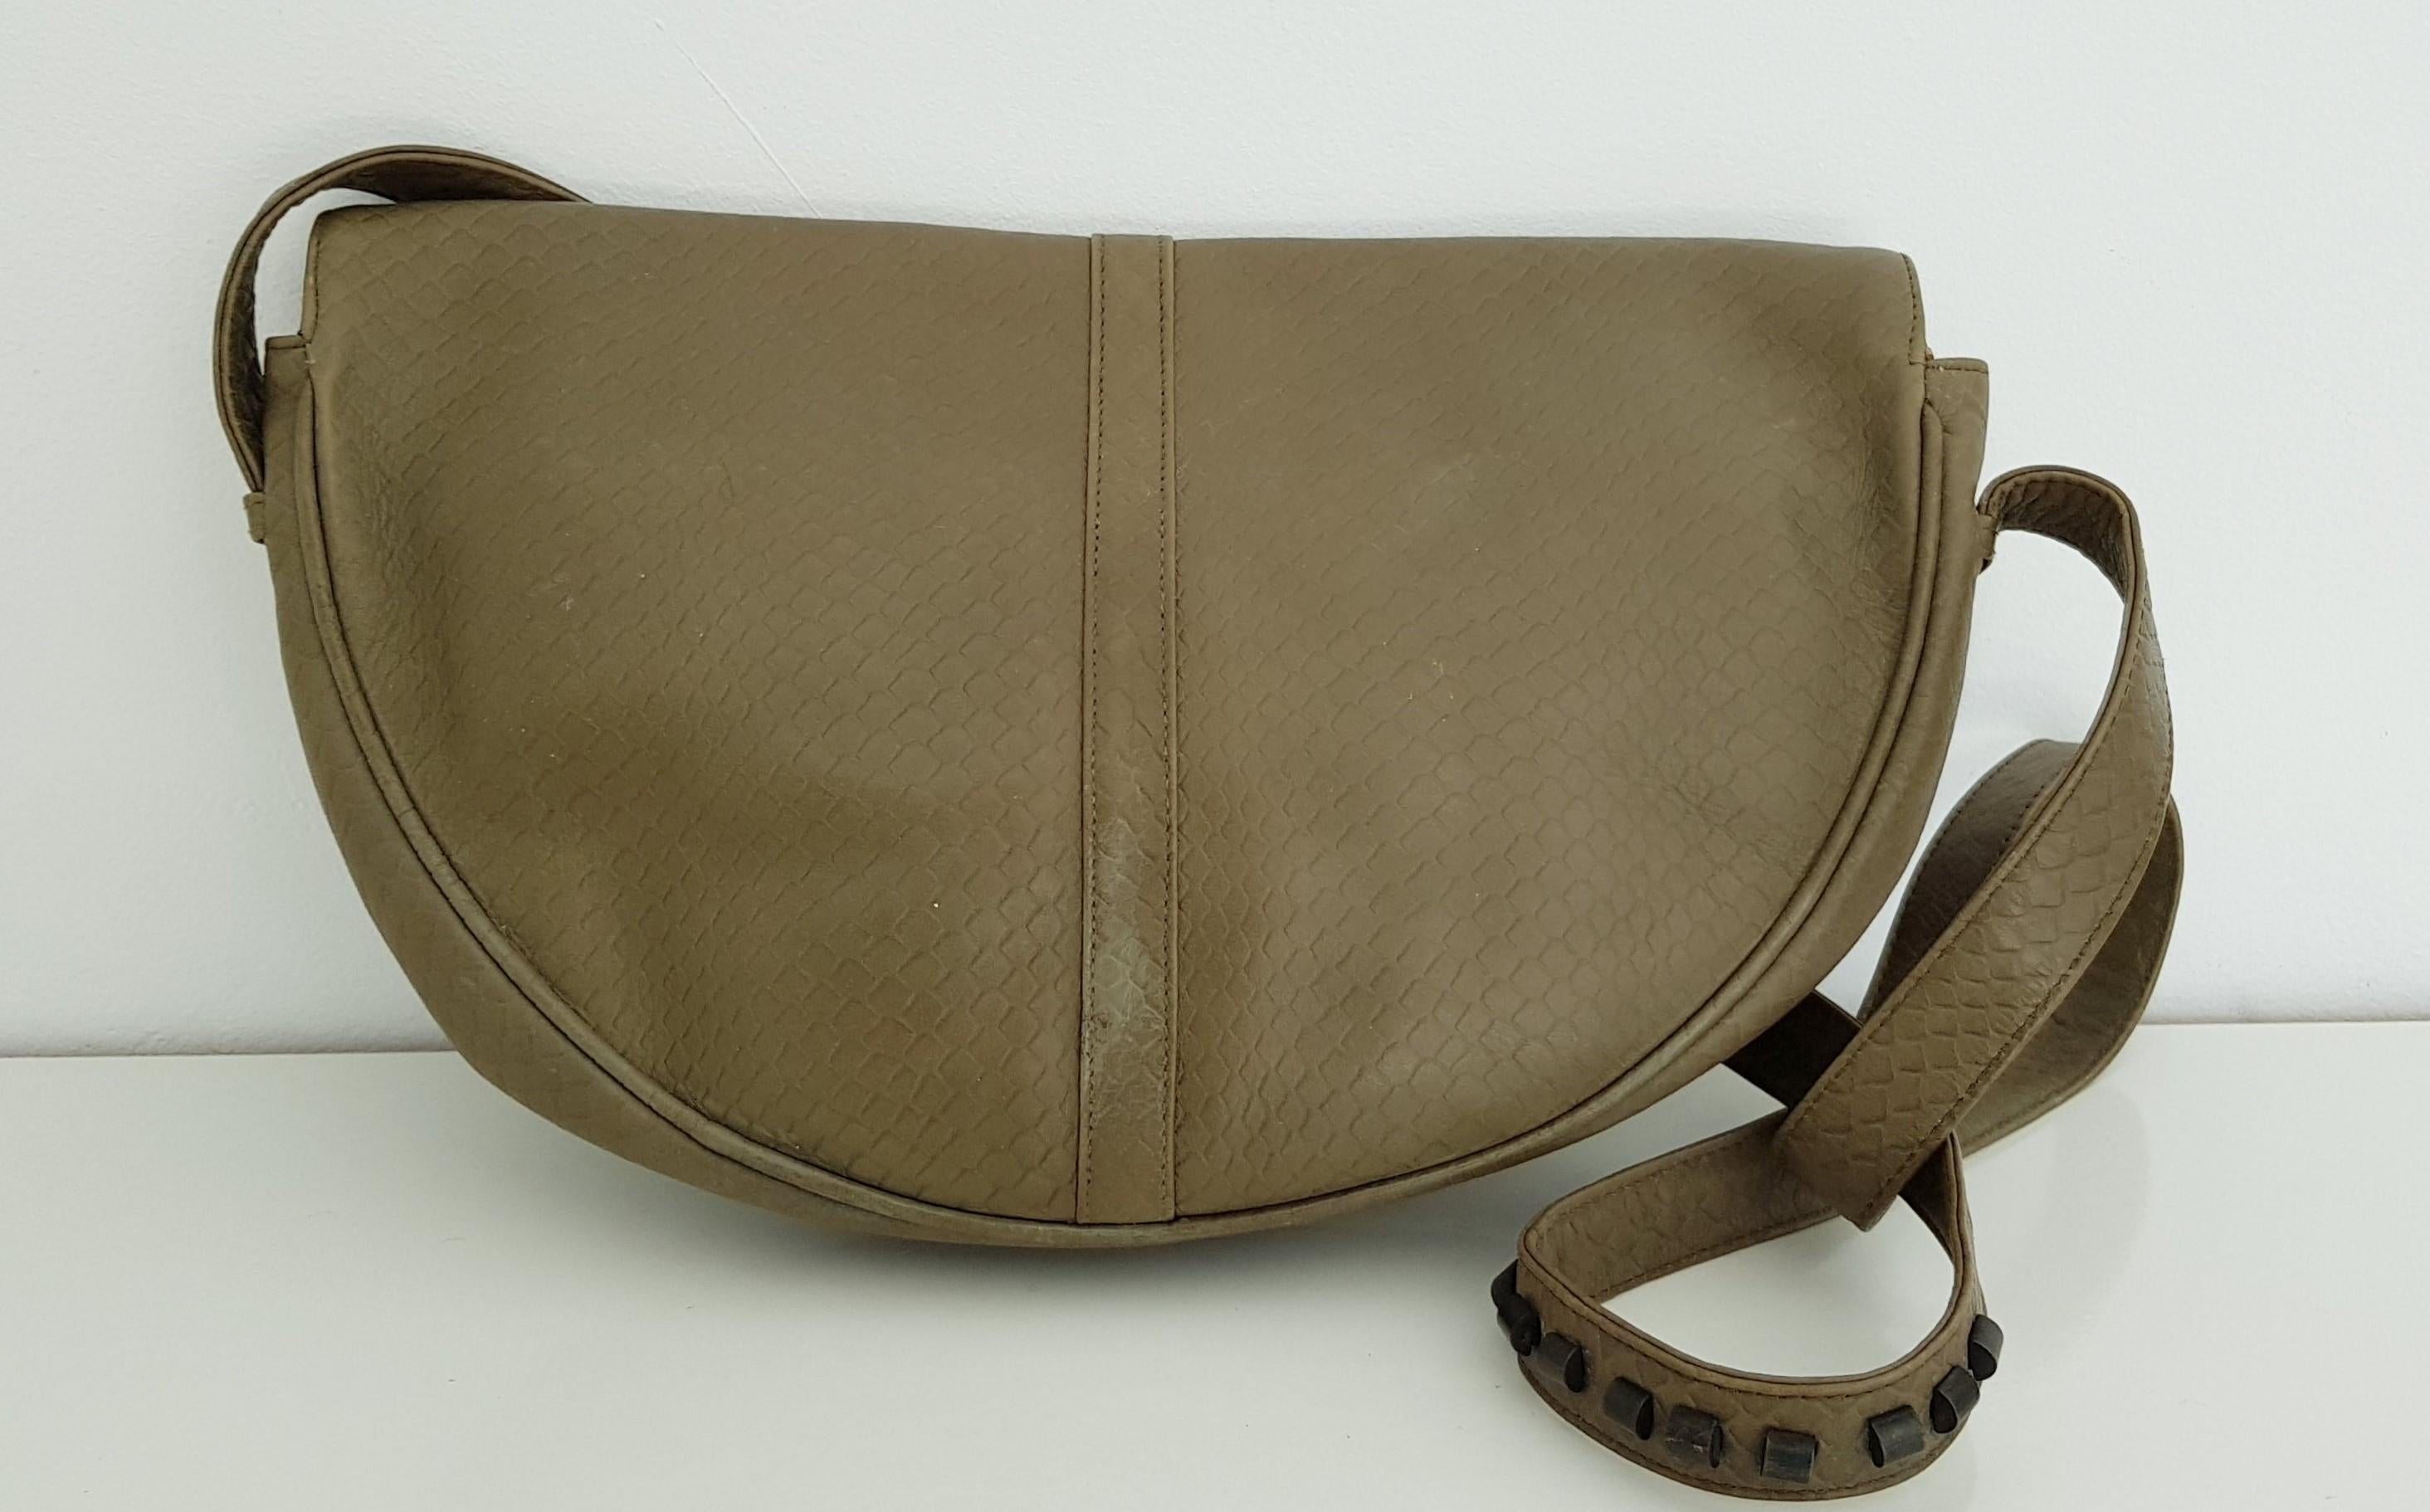 Leather Shoulder Bag Worked As Python by Gianni Versace In Excellent Condition For Sale In Somo (Santander), ES